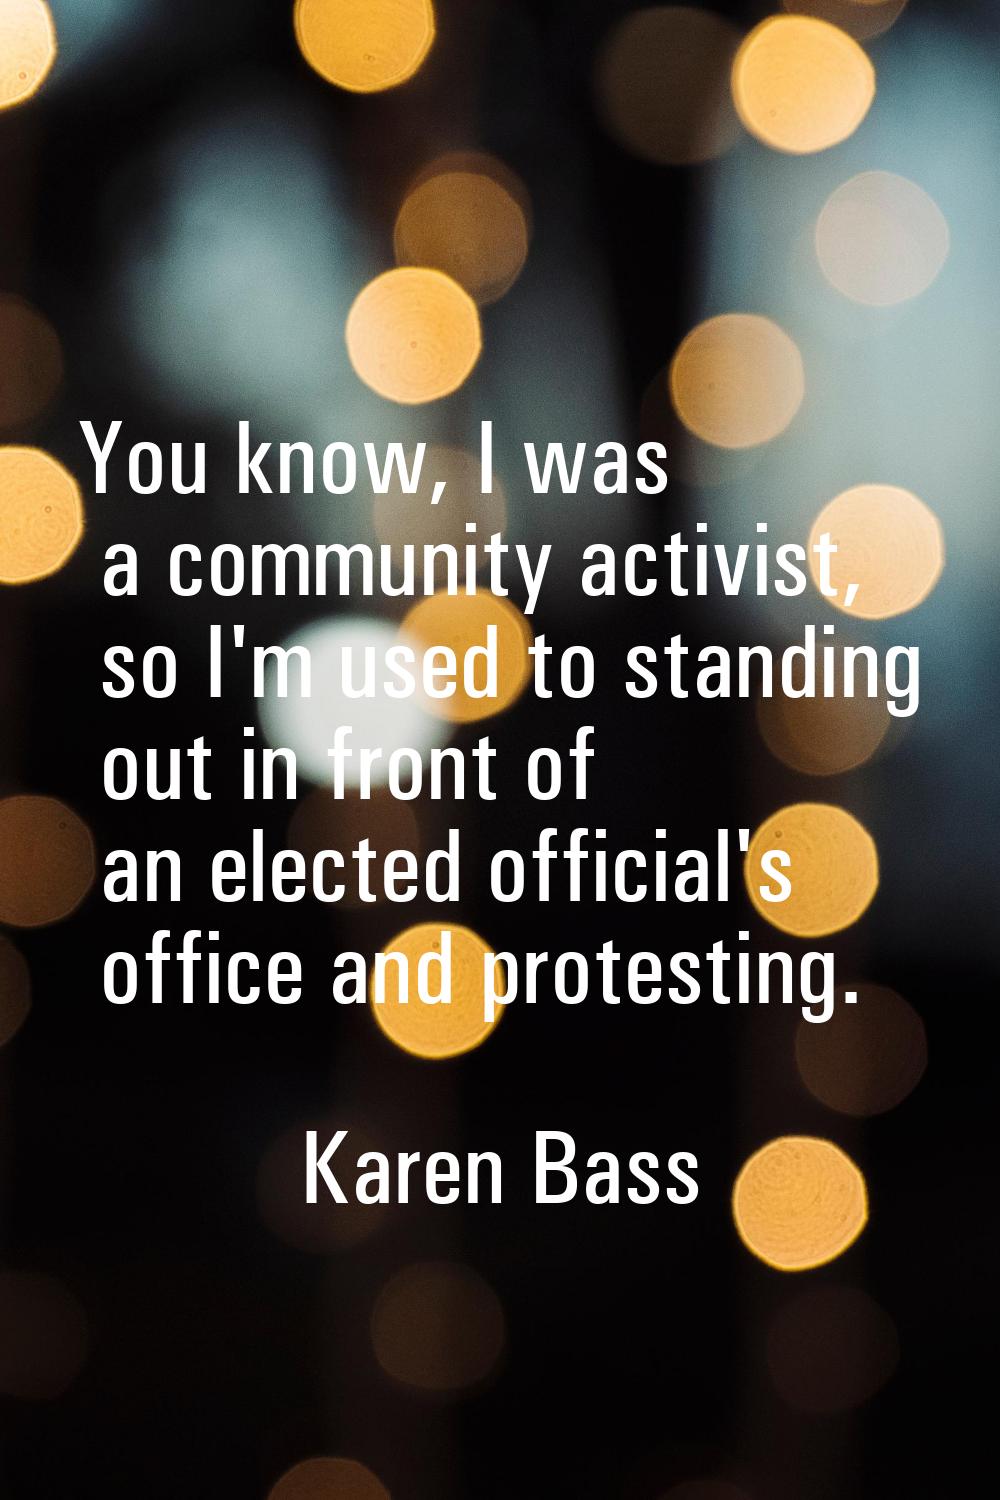 You know, I was a community activist, so I'm used to standing out in front of an elected official's